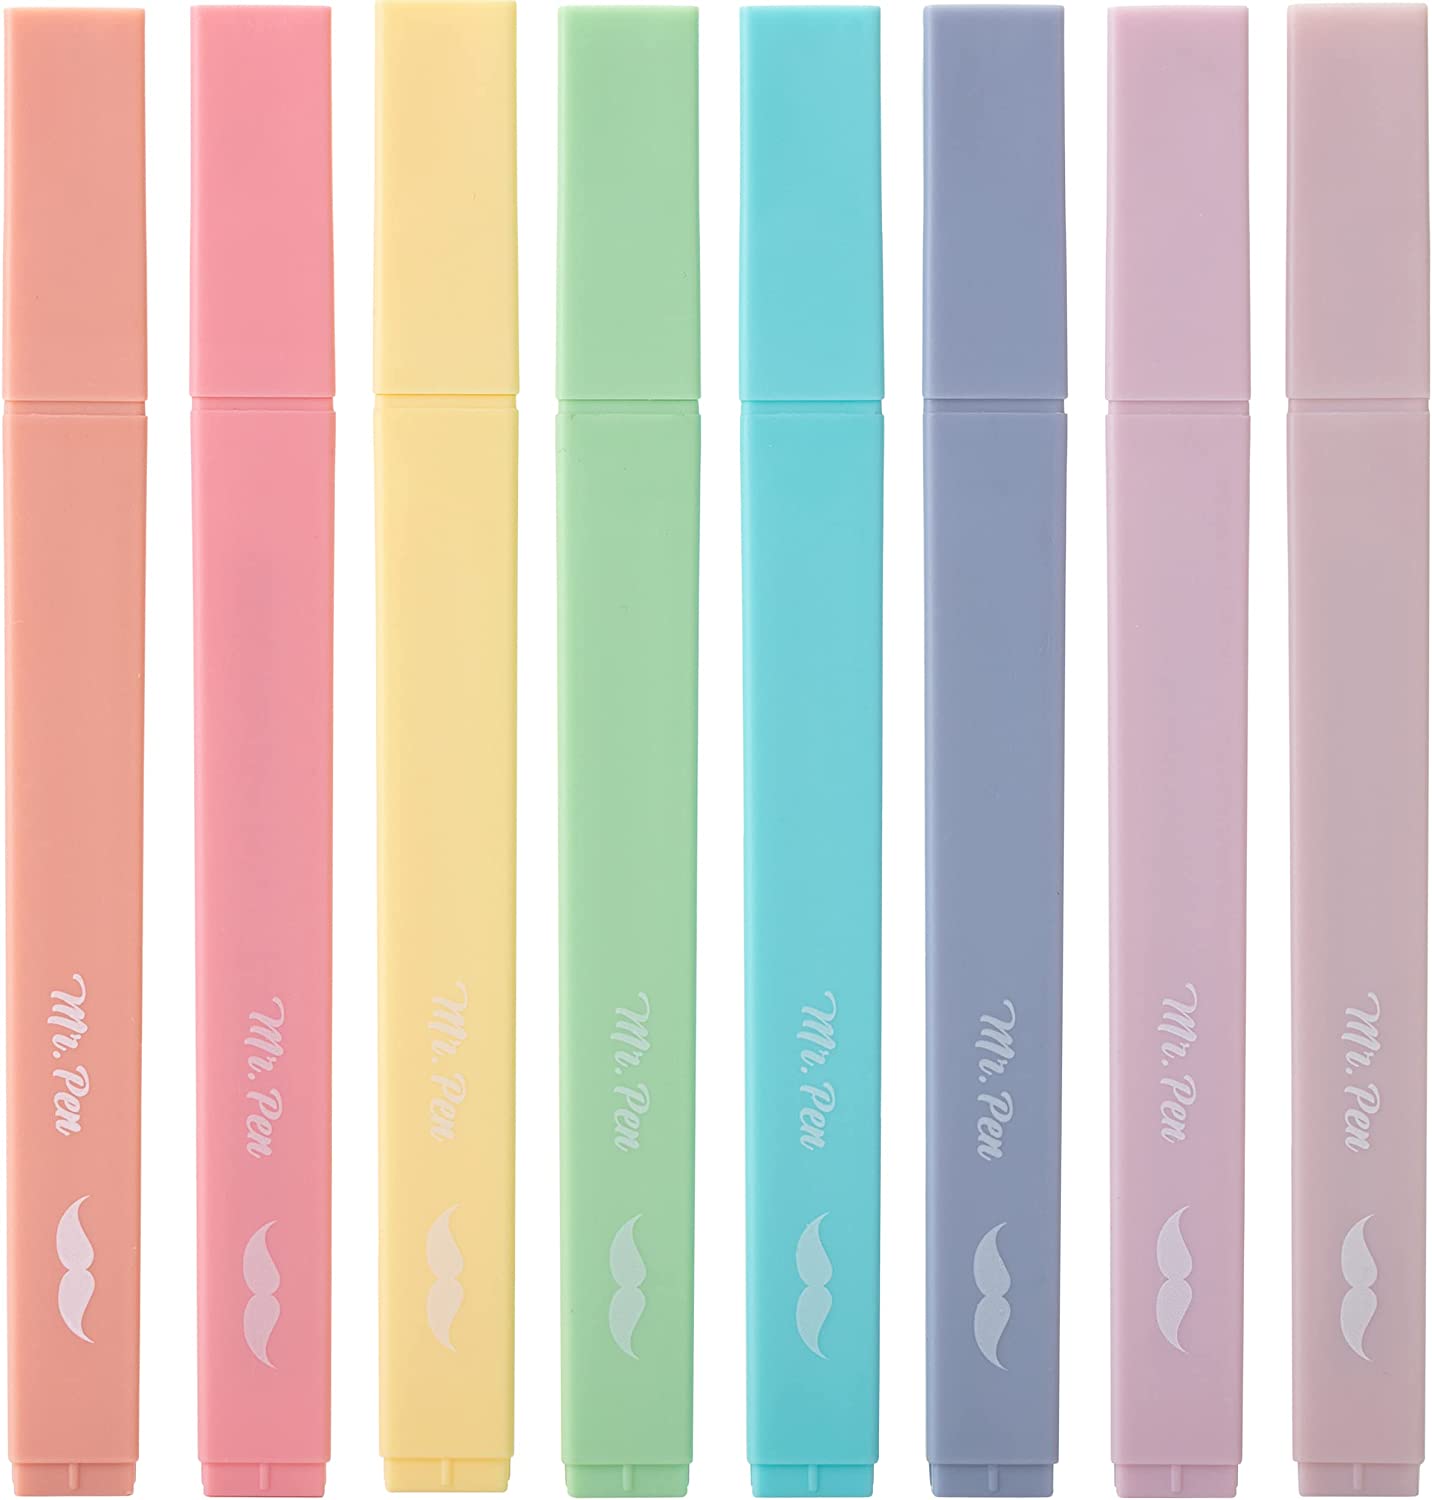 Aesthetic Cute Pastel Highlighters Set, 8 pcs, Chisel Tip, Candy Colors, No Bleed Bible Assorted Colors